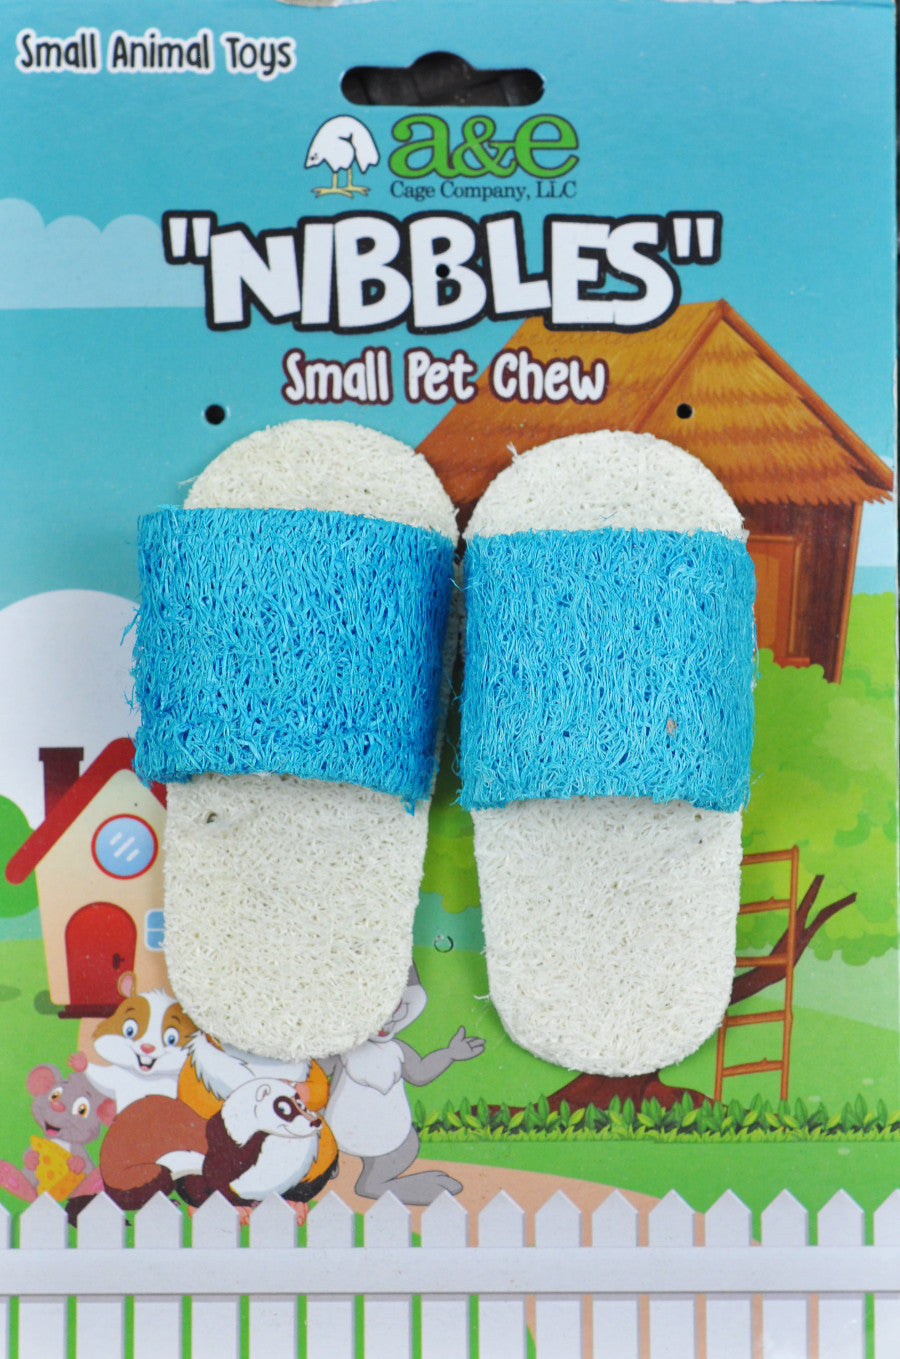 A &E Cages Nibbles Small Animal Loofah Chew Toy Sandals; 1ea